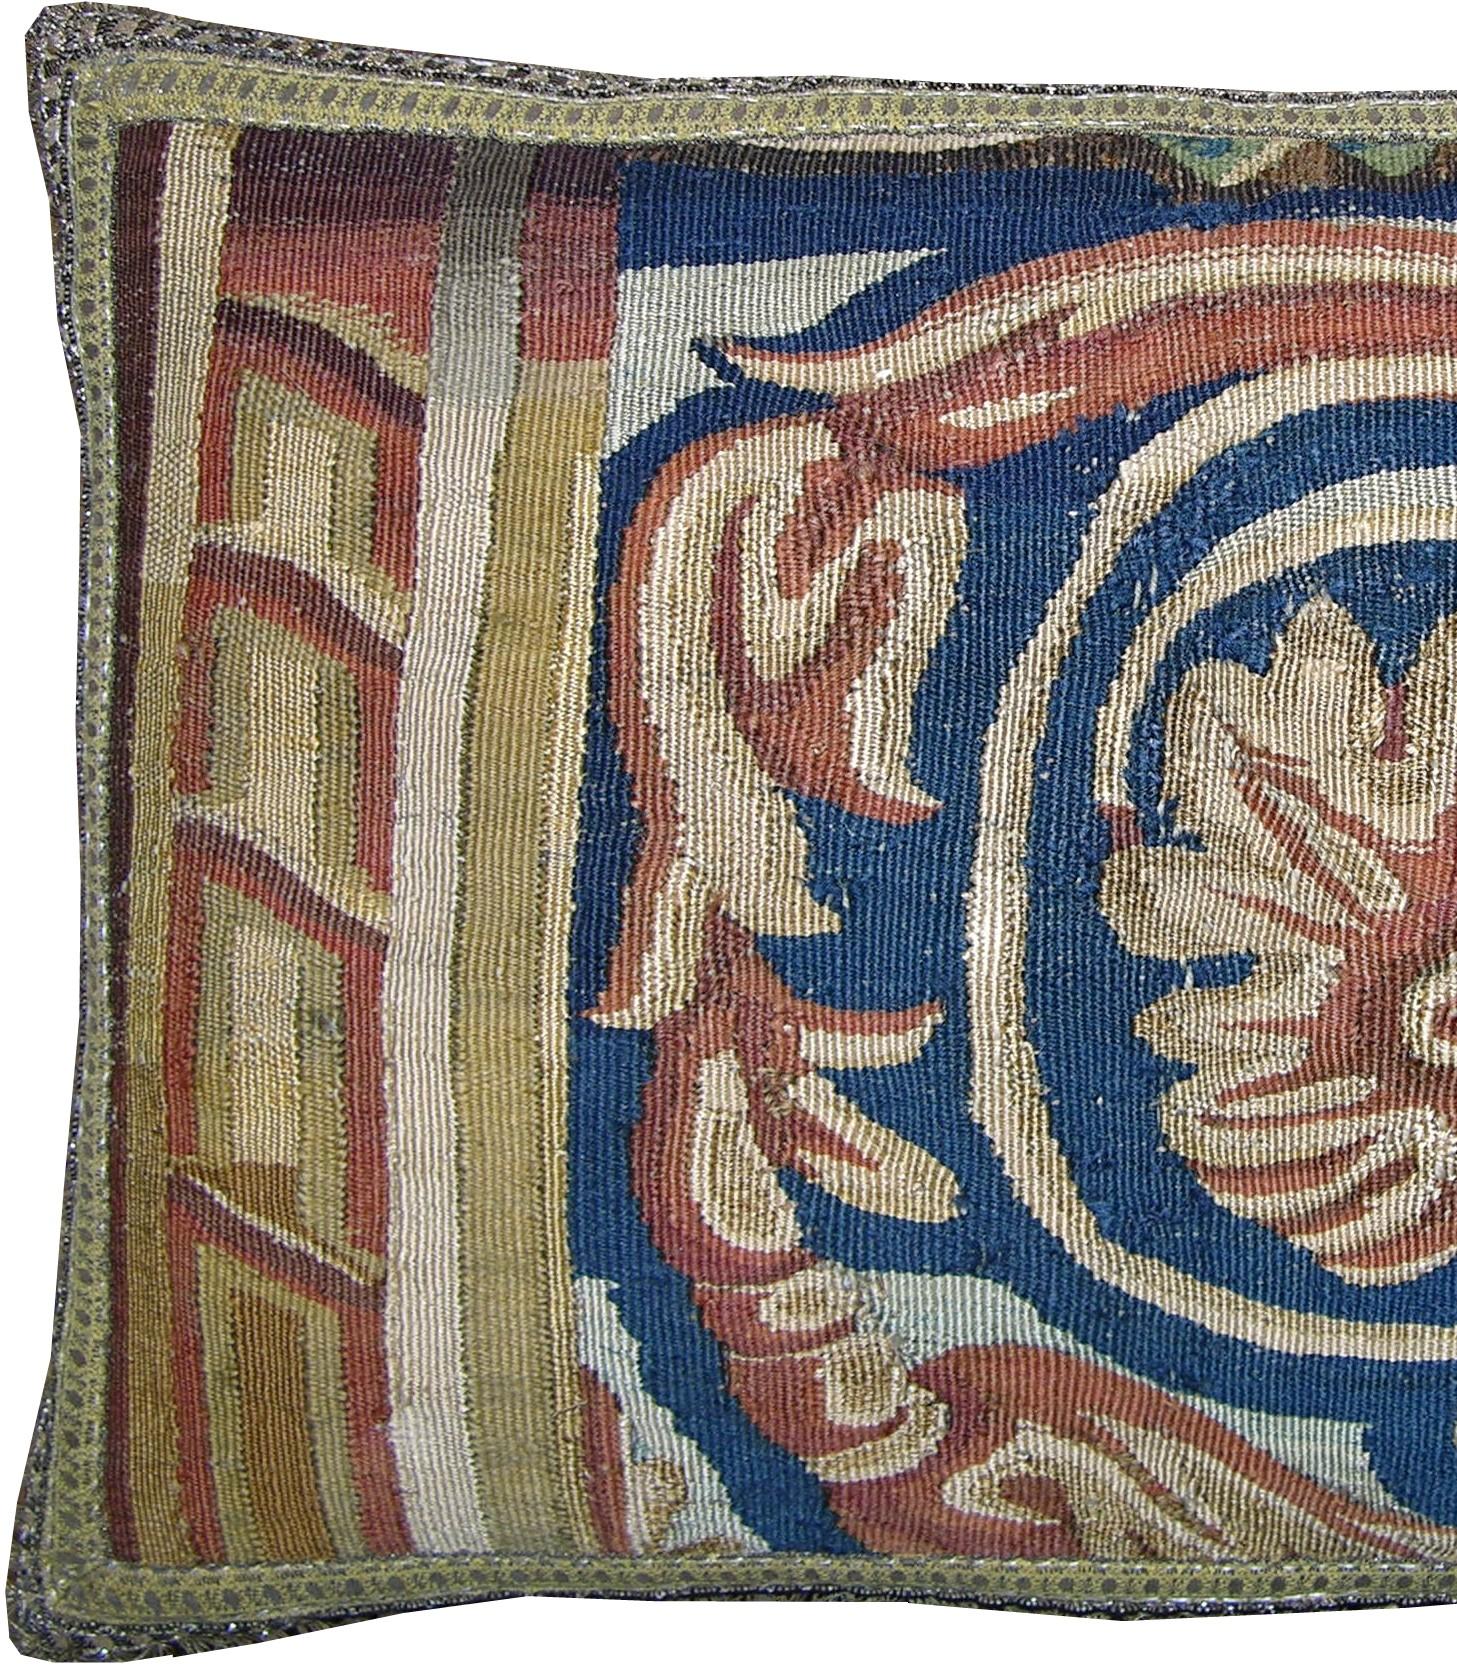 Unknown 17th Century Antique Brussels Tapestry Pillow For Sale